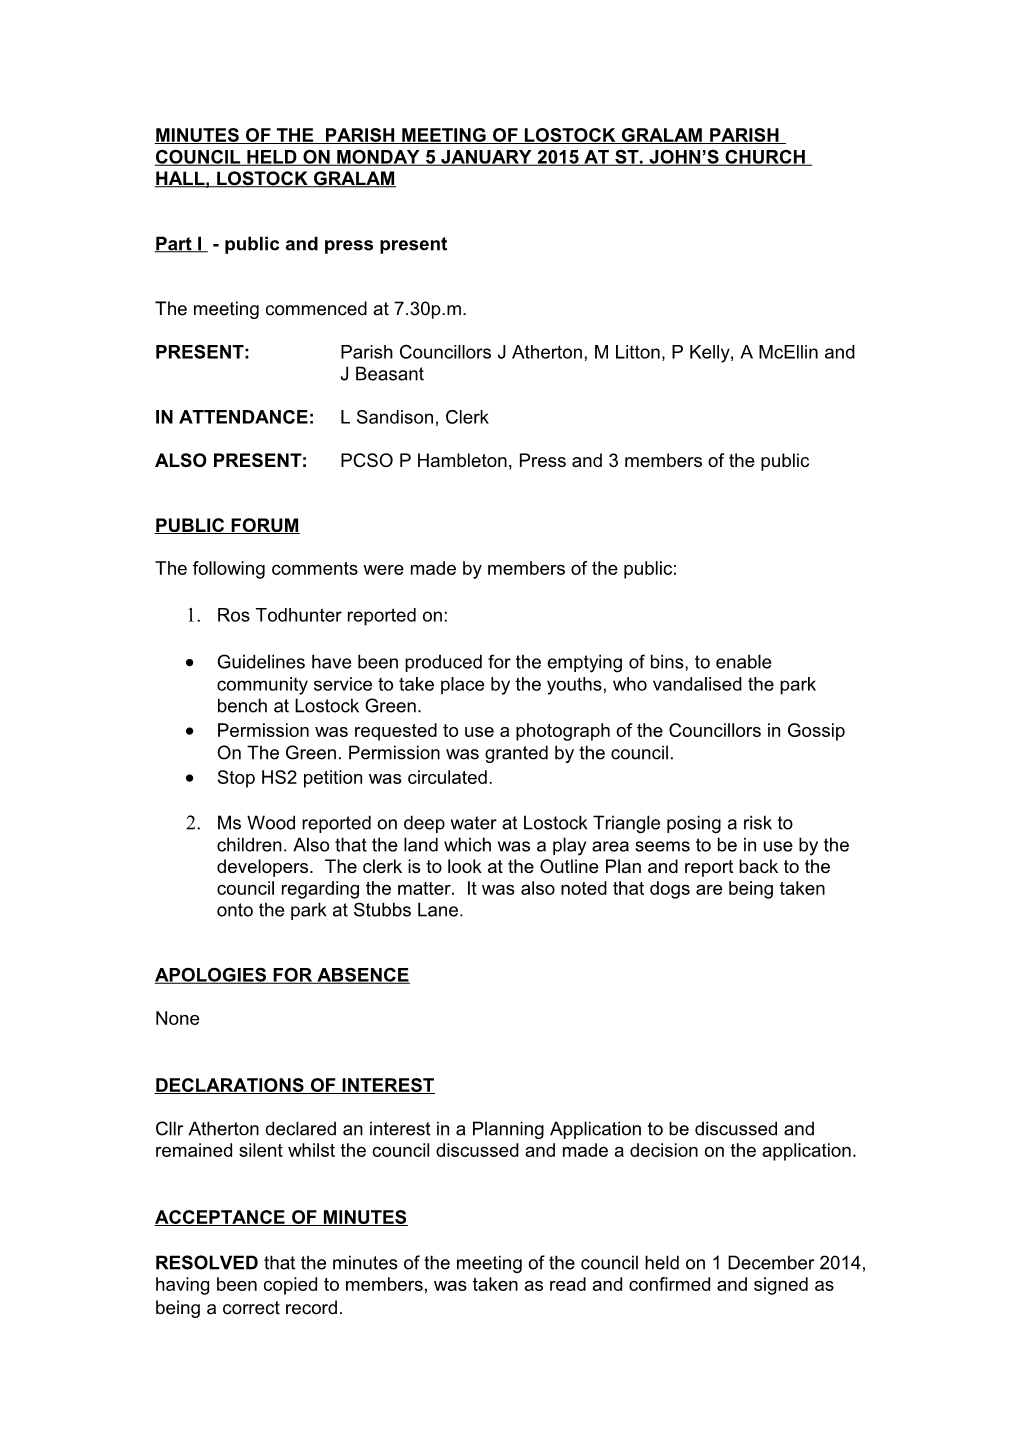 Minutes of the Meeting of Lostock Gralam Parish Council Held on Monday 3 November 2008 s1